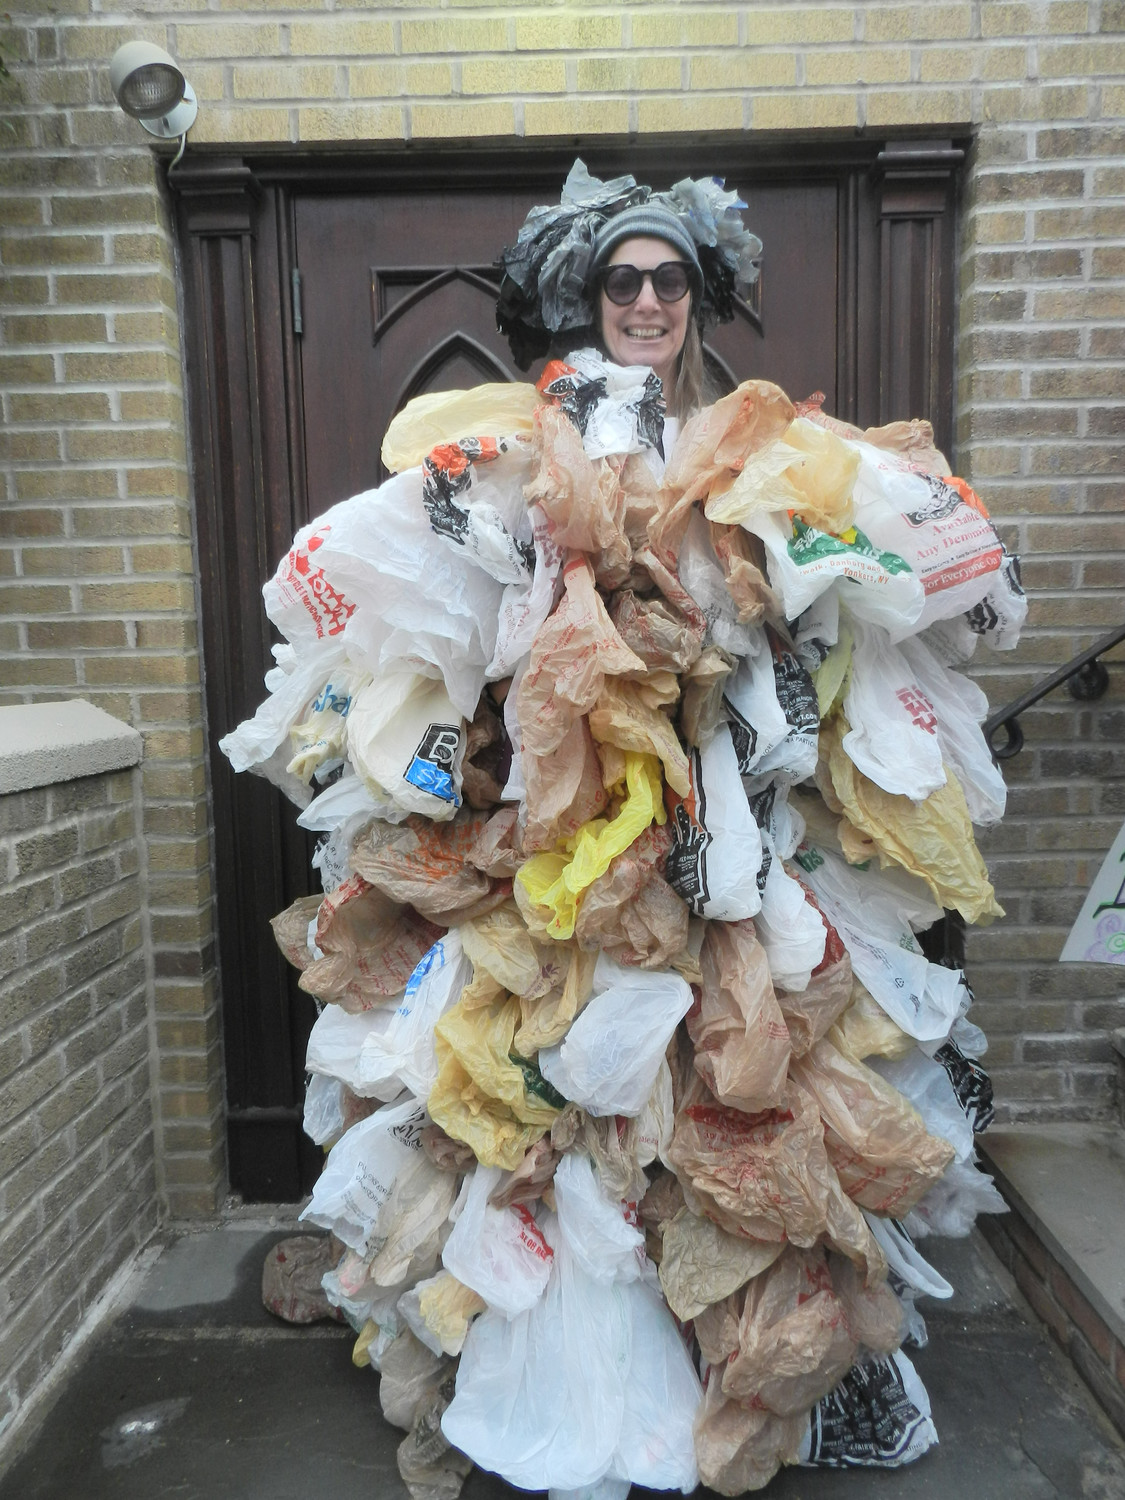 Environmental activist Susan Brockmann, of Lynbrook, wore a “dress” made of 500 single-use bags, the number of bags the average person uses in a year.